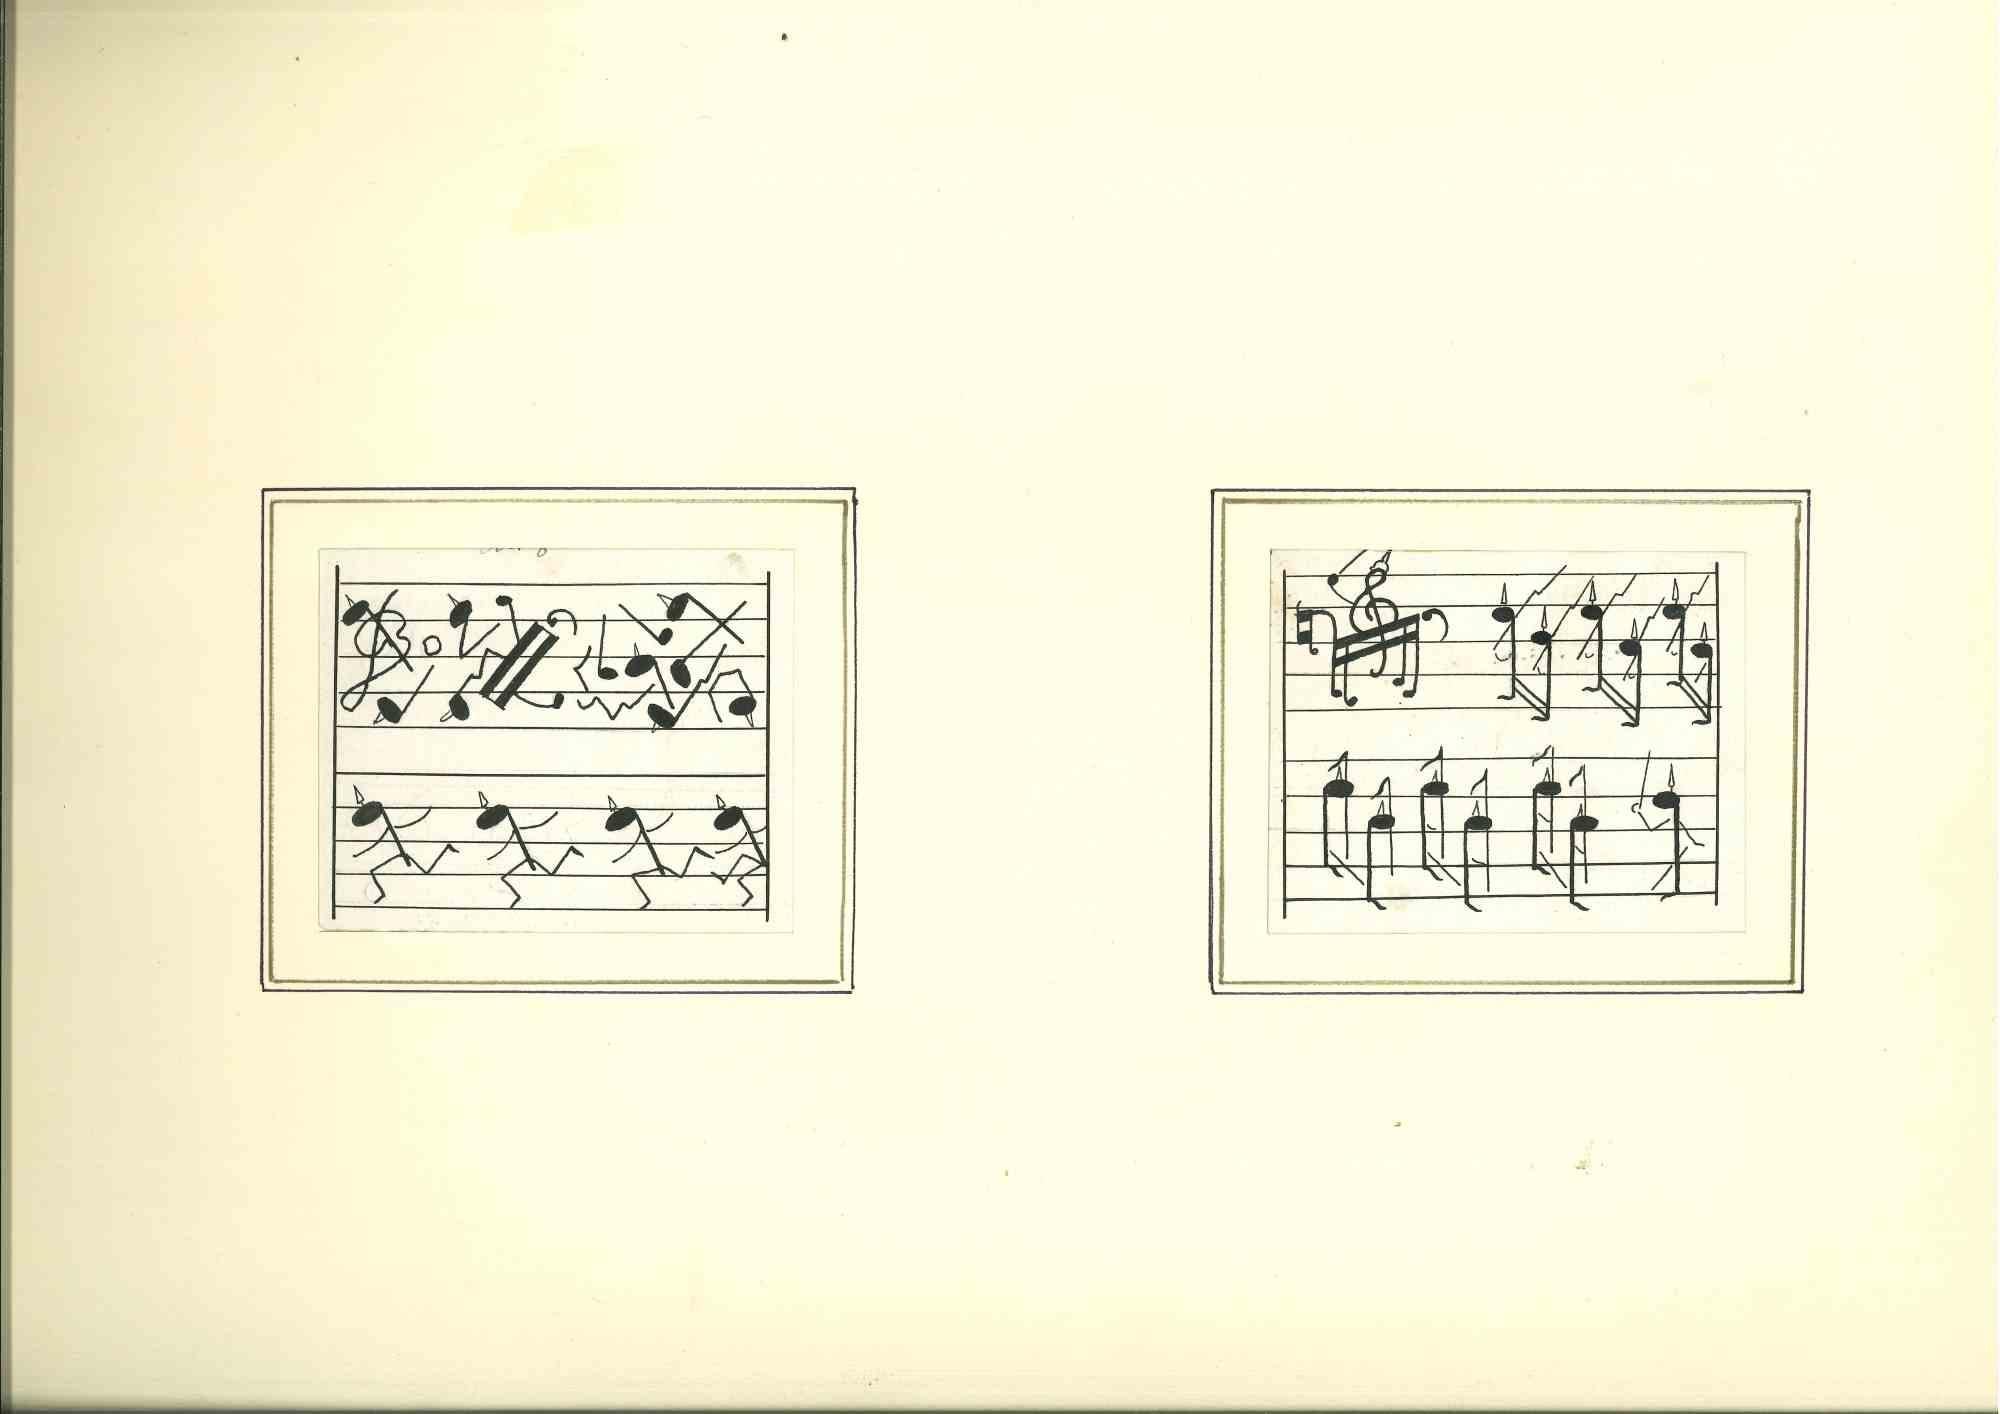 Unknown Figurative Art - Army of Musical Notes - China Ink - Mid 20th Century